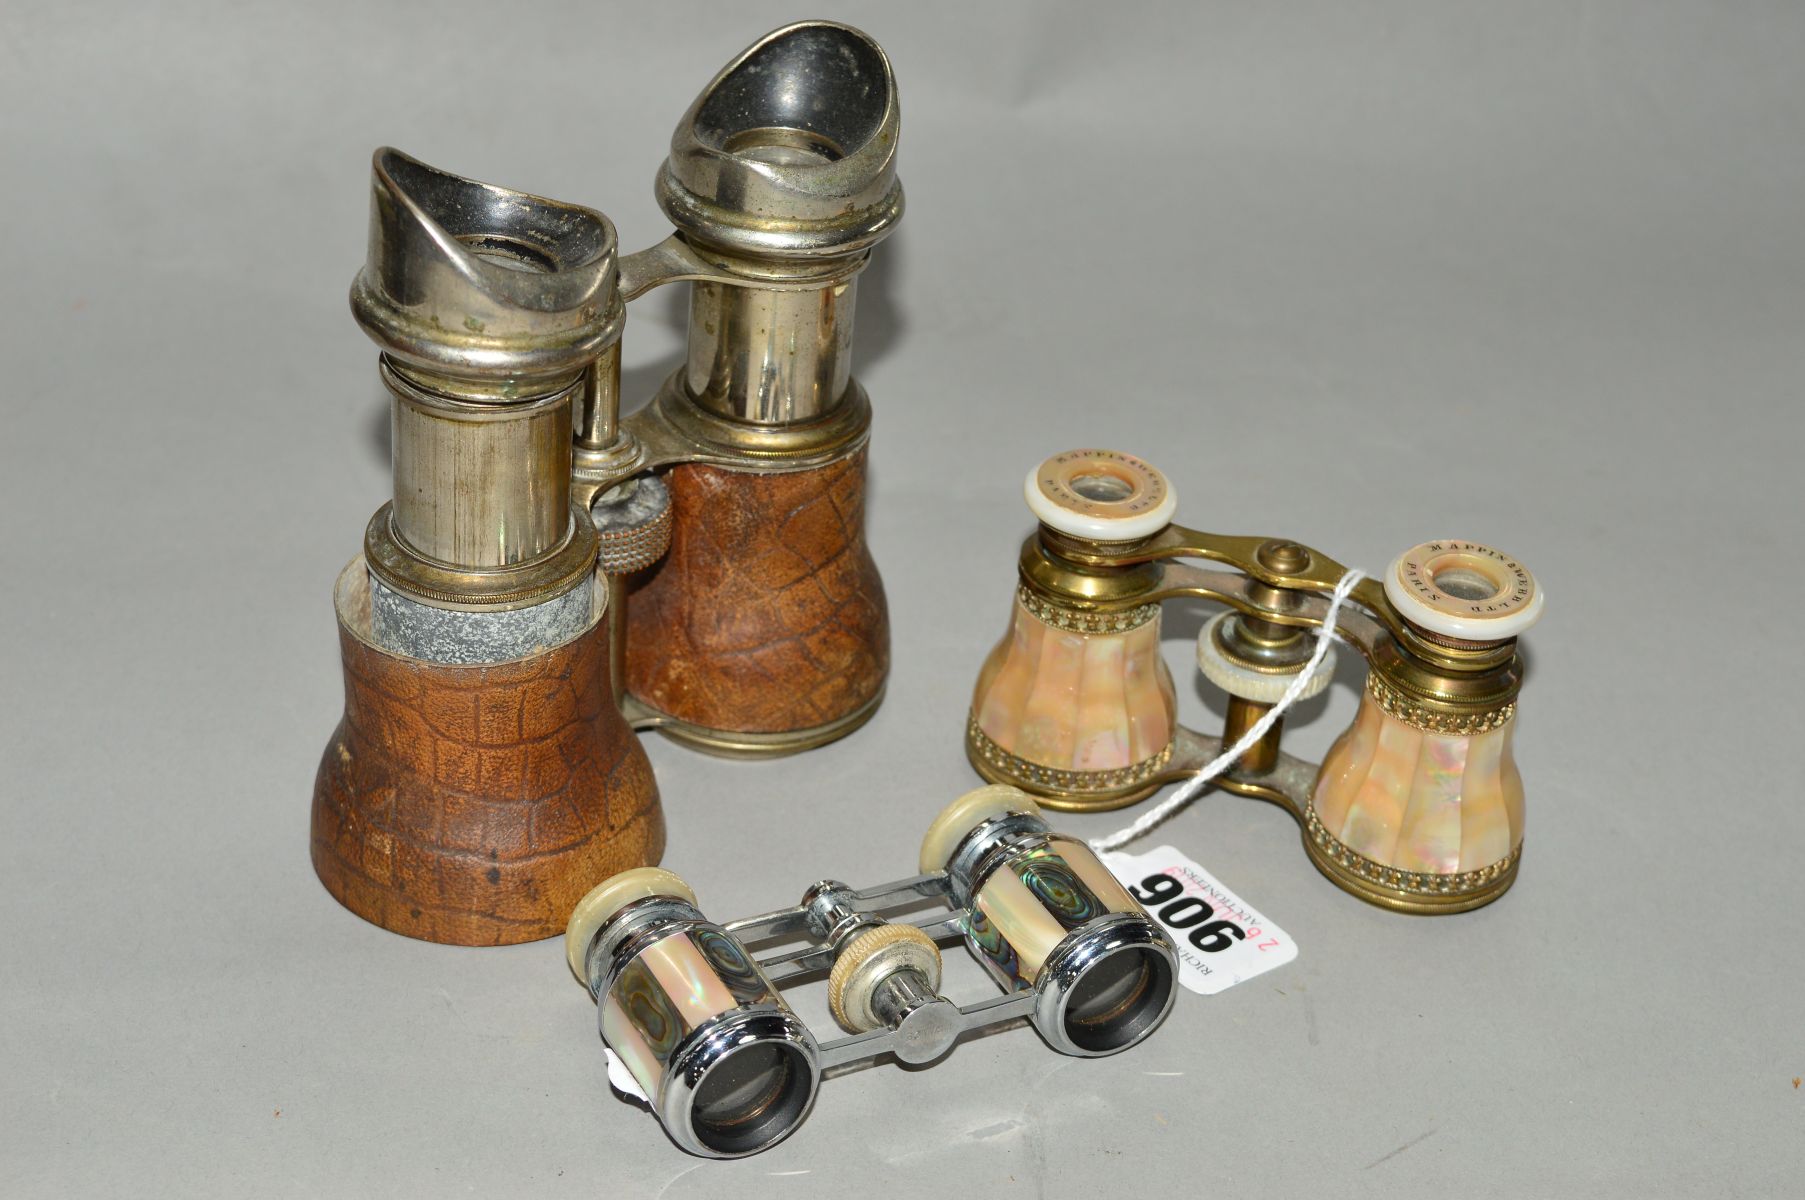 A PAIR OF LATE 19TH CENTURY MOTHER OF PEARL AND GILT METAL OPERA GLASSES, the eye pieces marked '